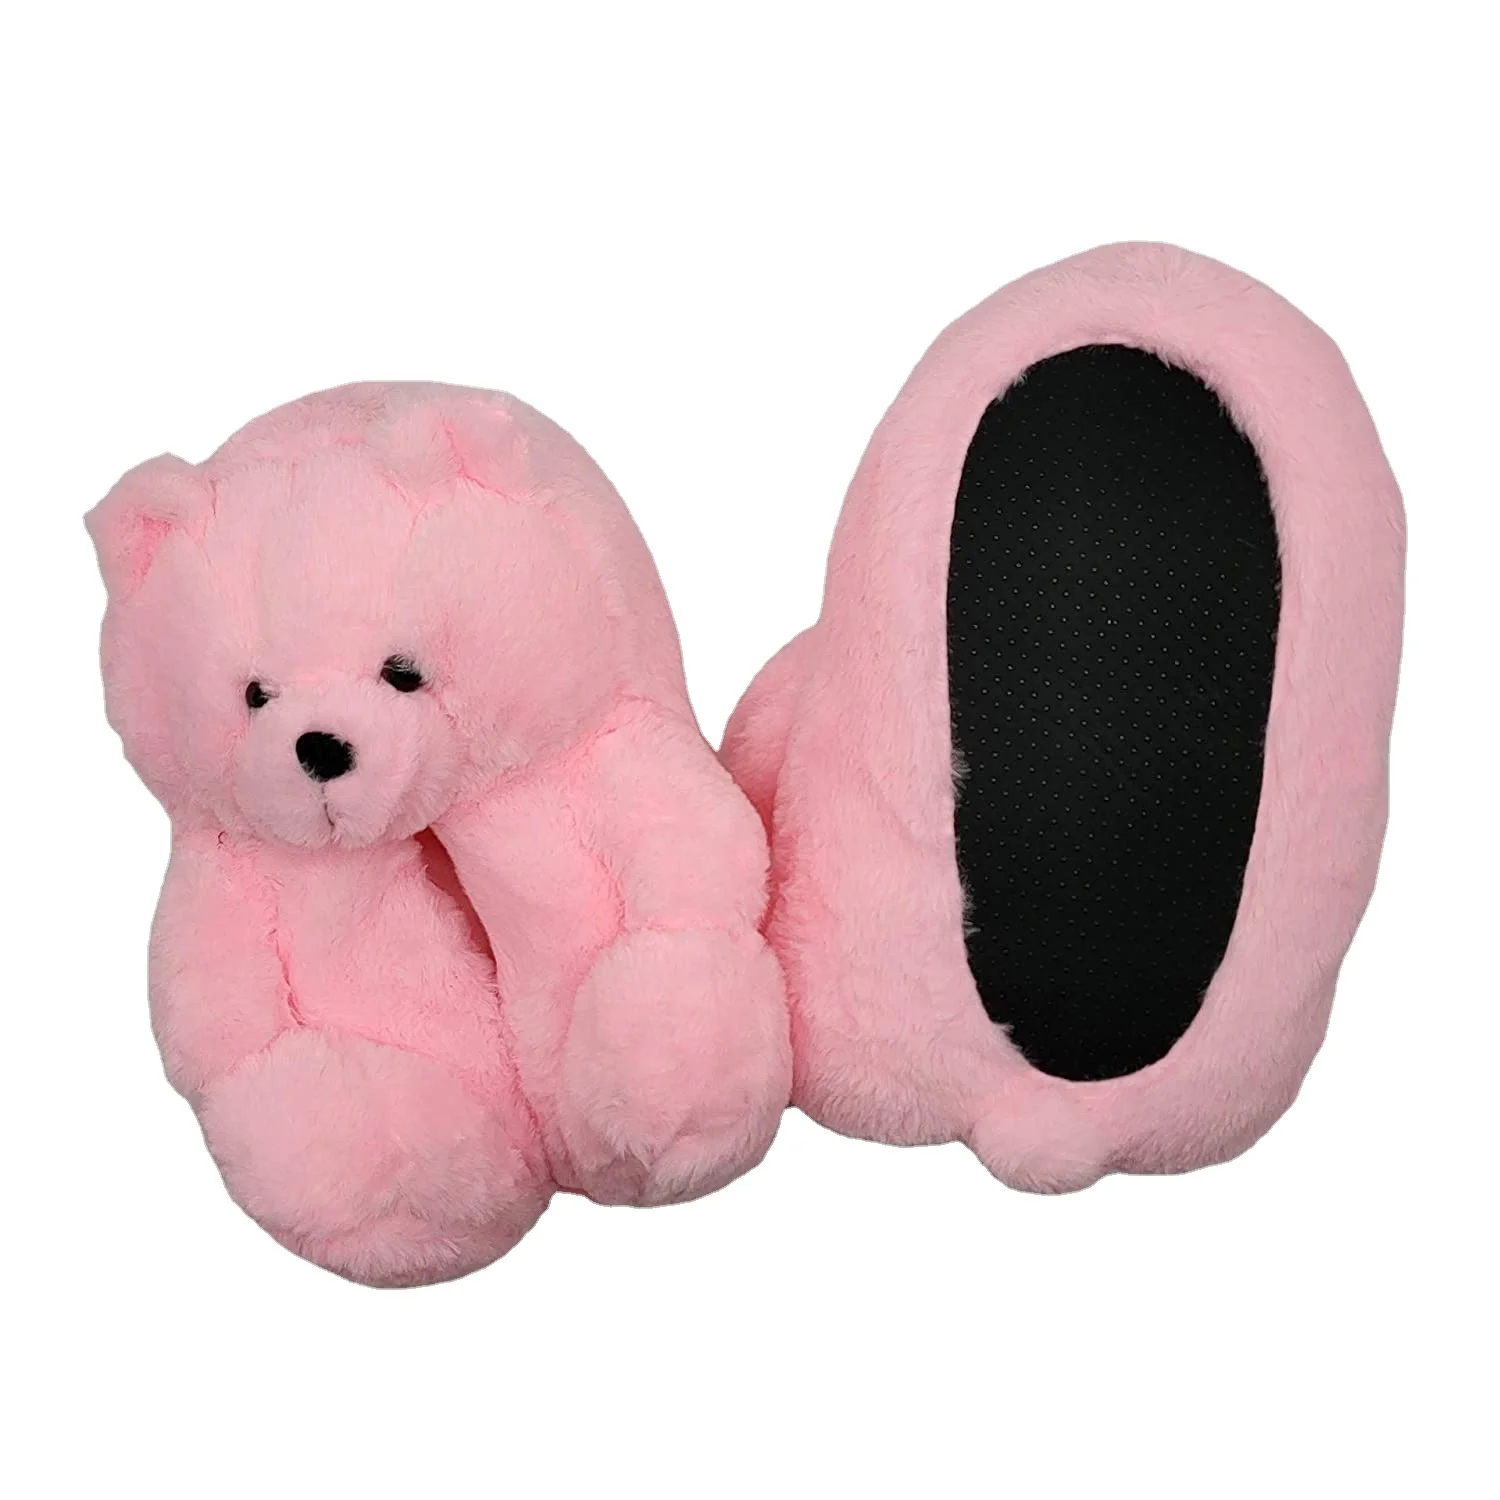 

teddy bear slippers women 2021 new arrivals bear slippers animal shaped plush fluffy house slippers, Customized color